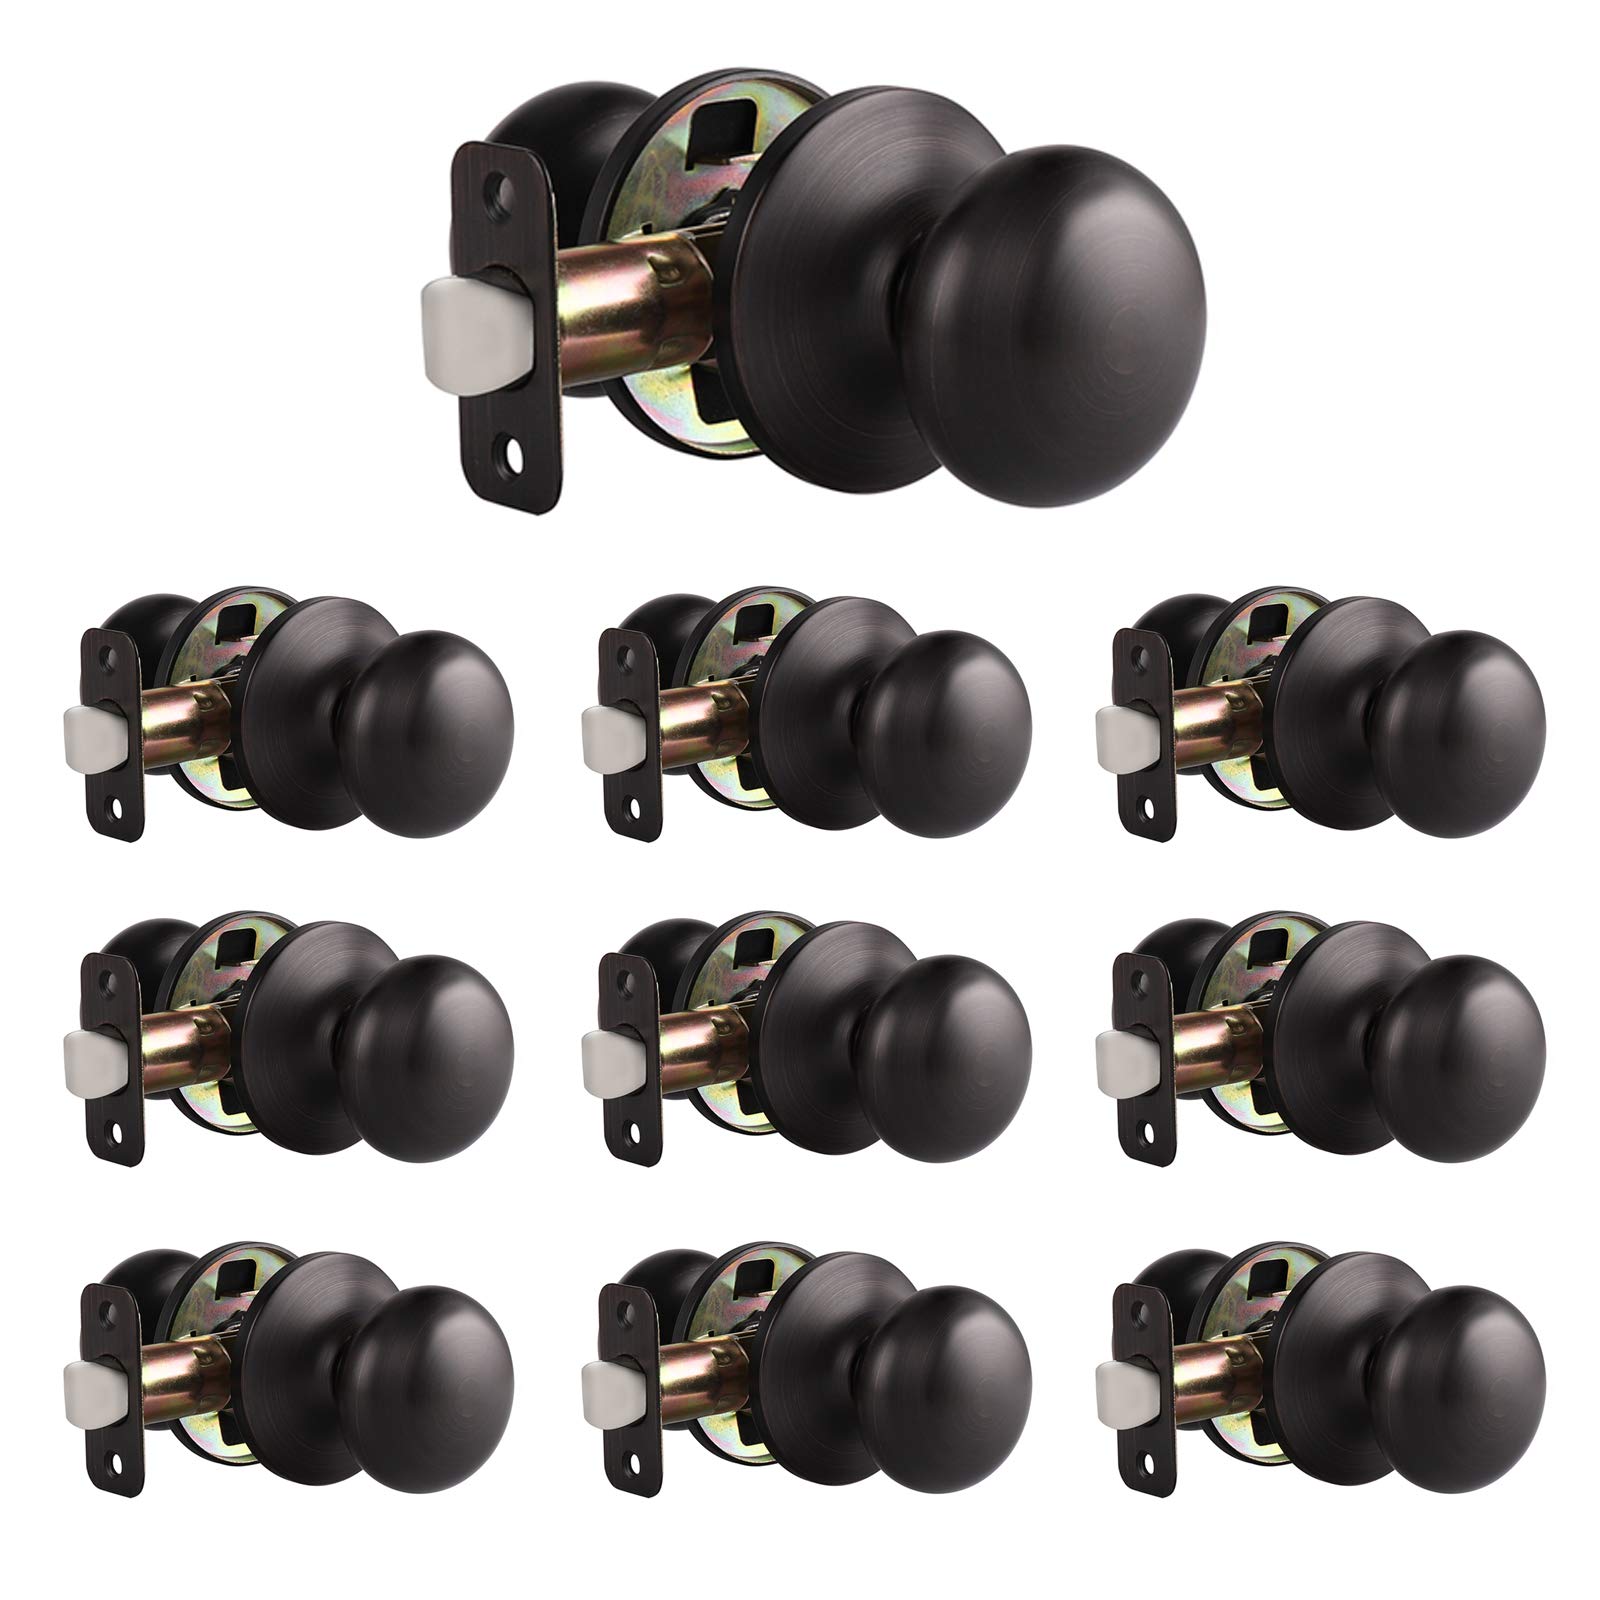 Probrico Ball Knob with Rosette Oil Rubbed Bronze Finish Passage Door Knobs 10 Packs